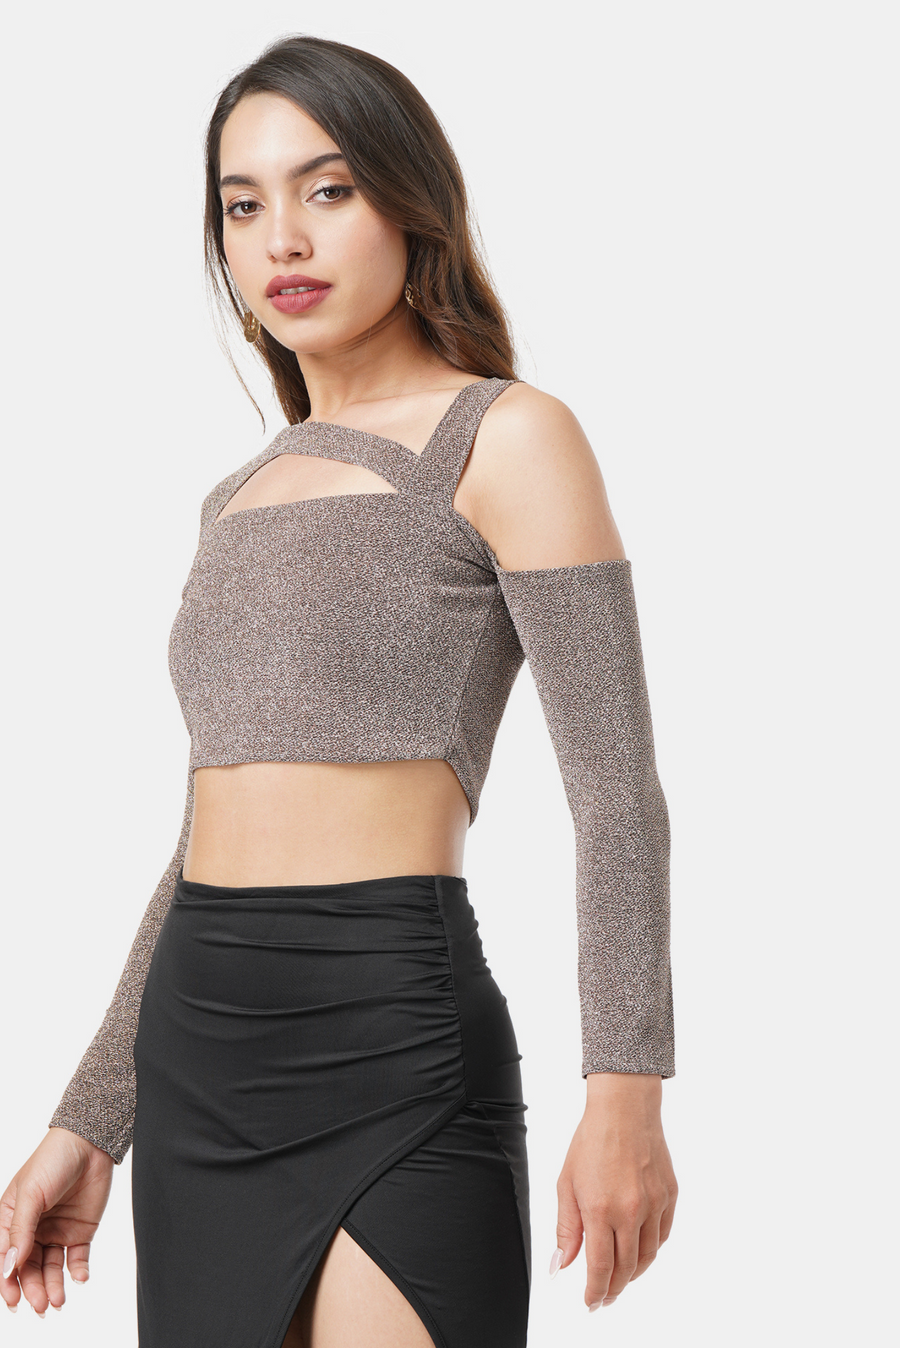 LEXI SHIMMER KNIT CROP TOP CHAMPAGNE